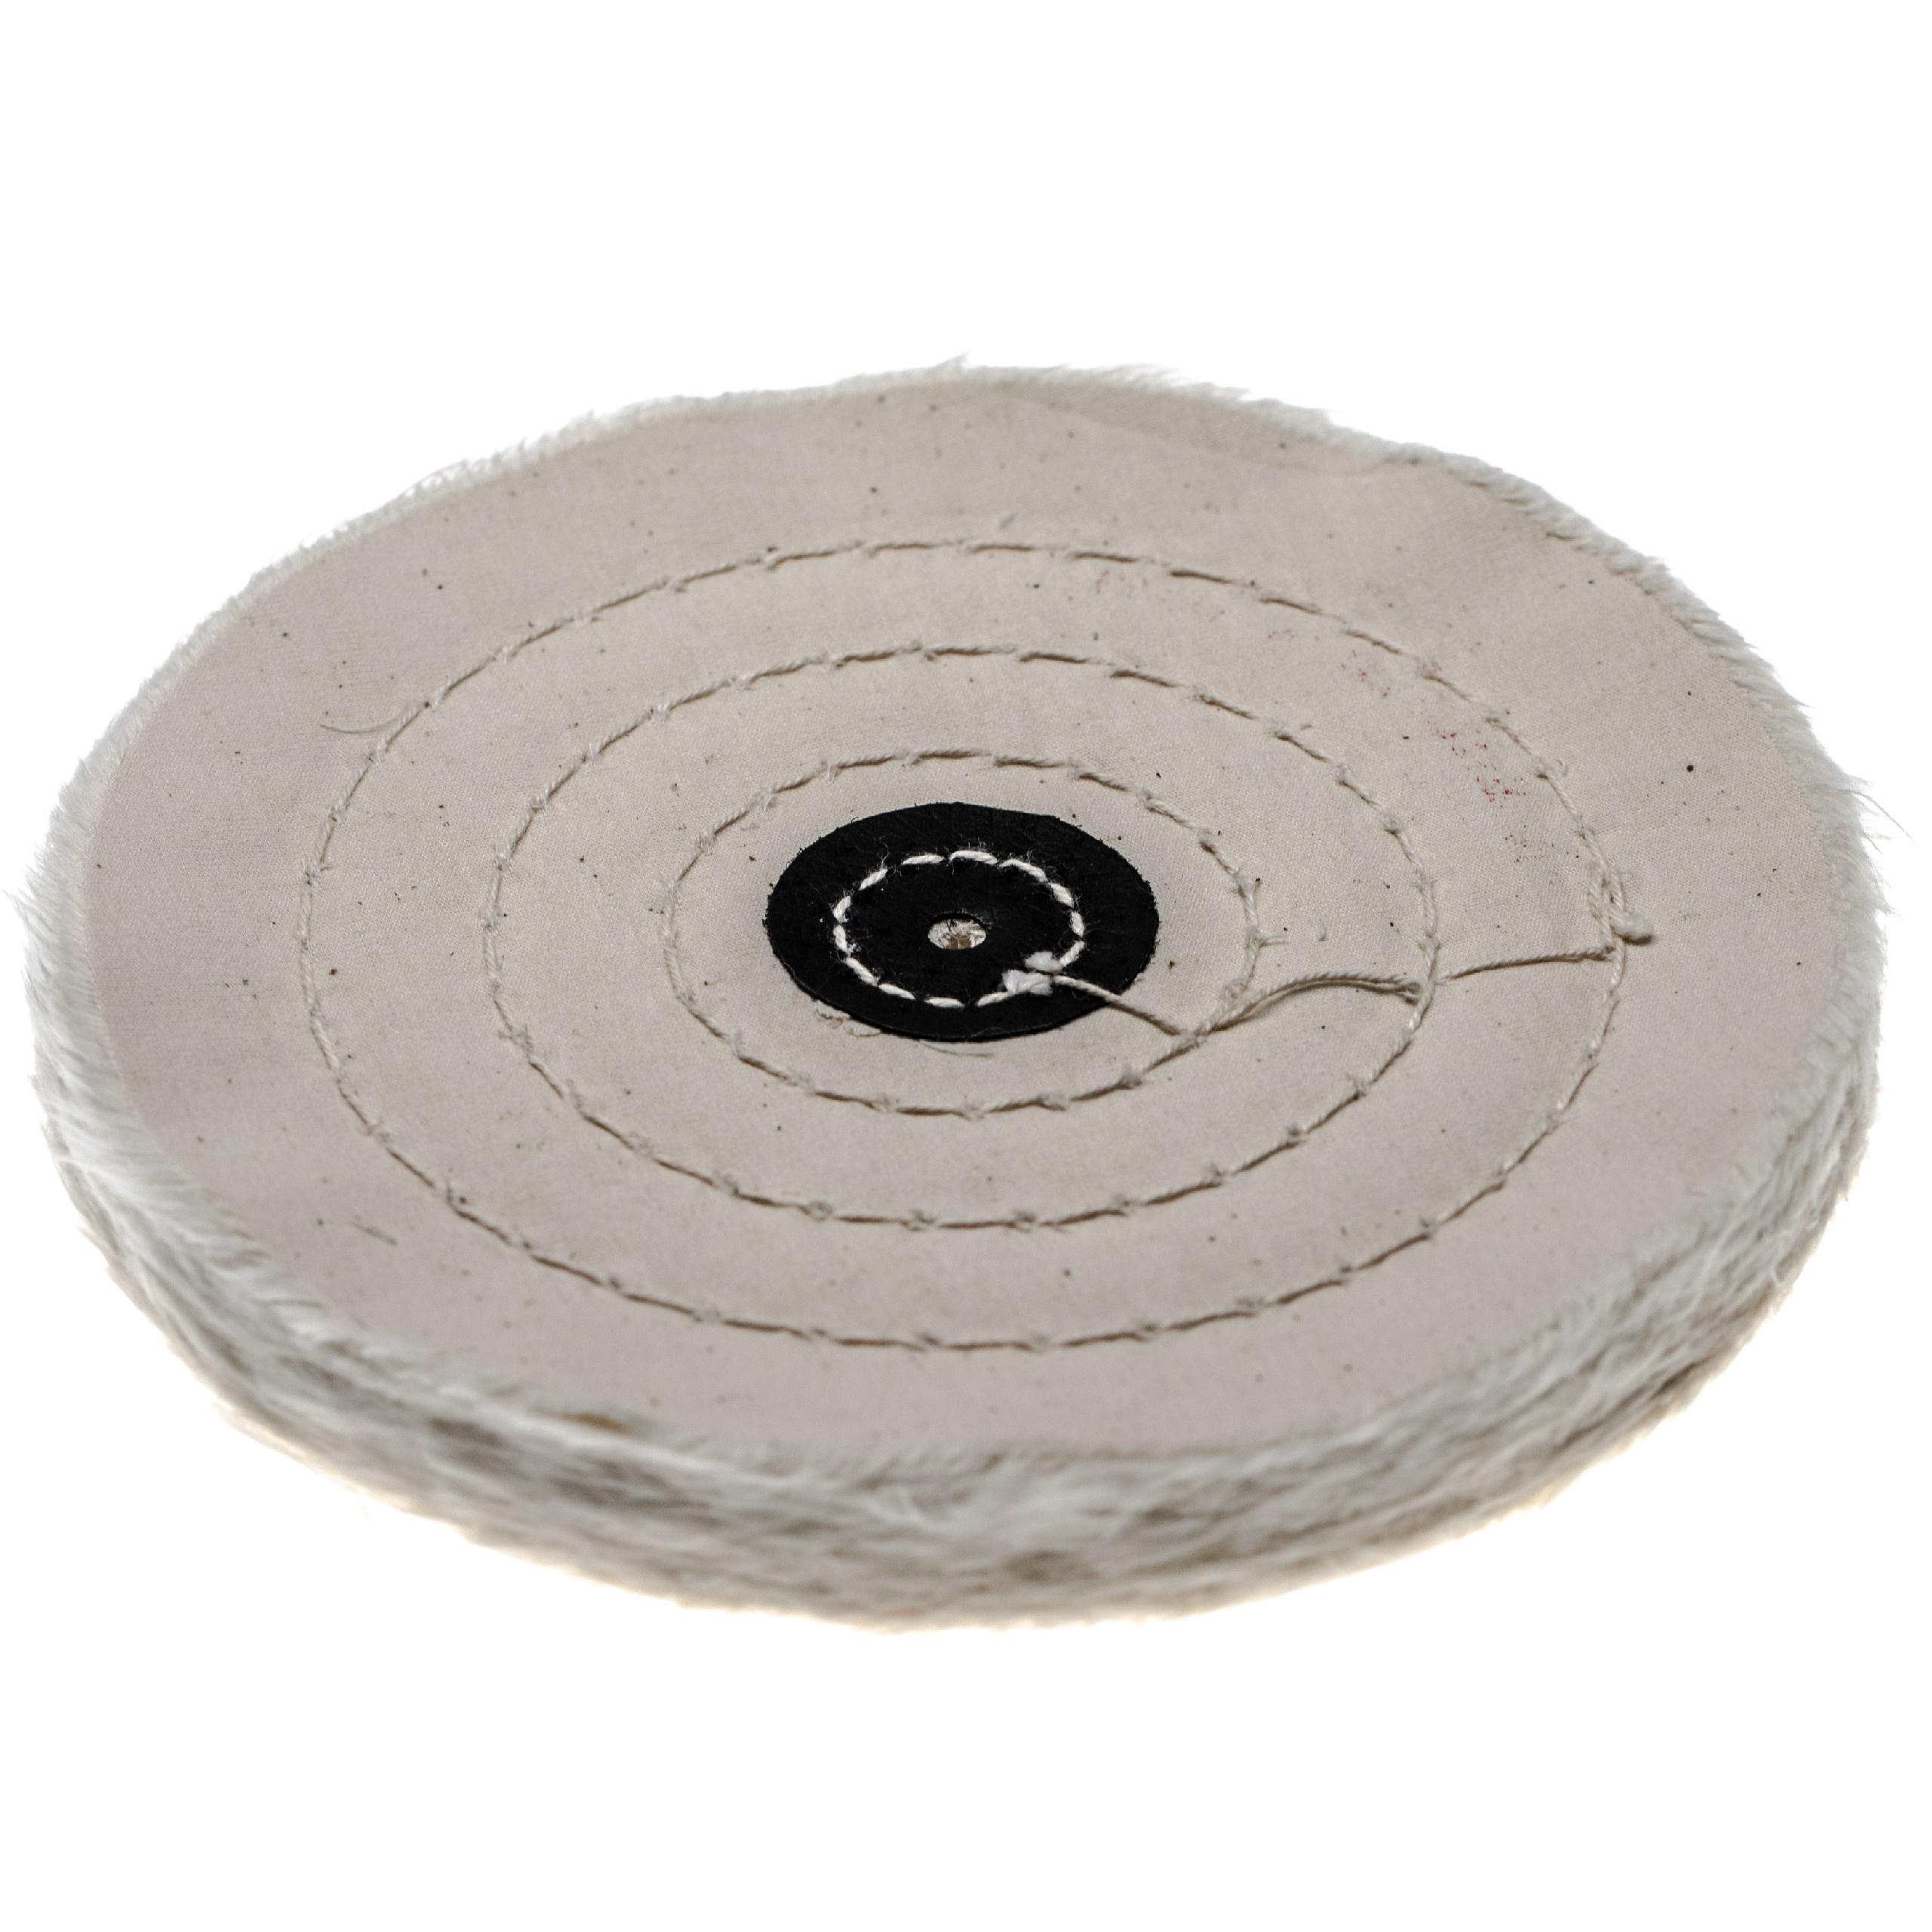 Polishing Pad suitable for all Standard Angle Grinders, Screwdrivers with 15.5cm Diameter - cream